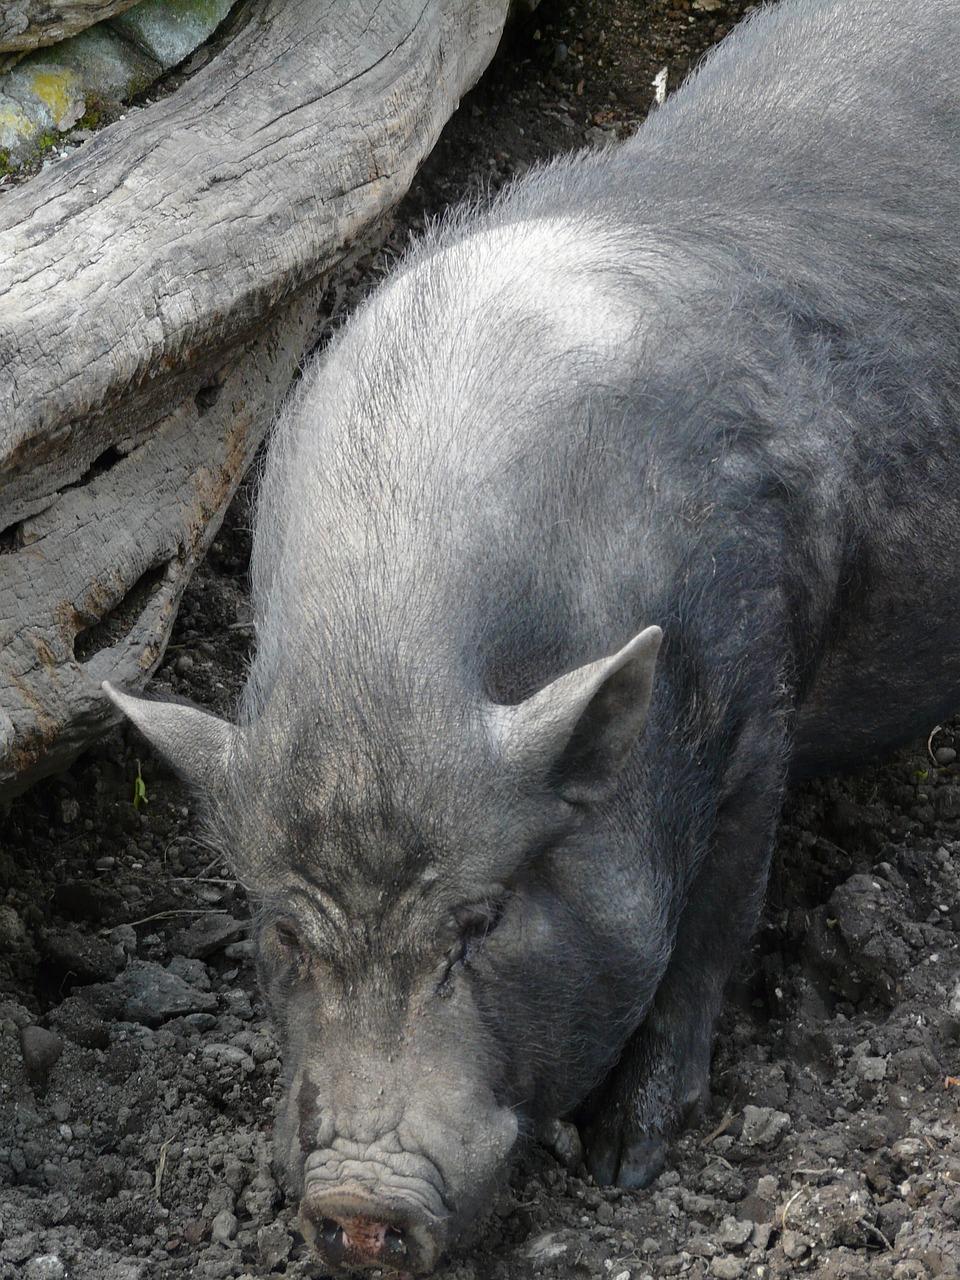 Benefits of Mud for Pigs' Emotional Well-Being